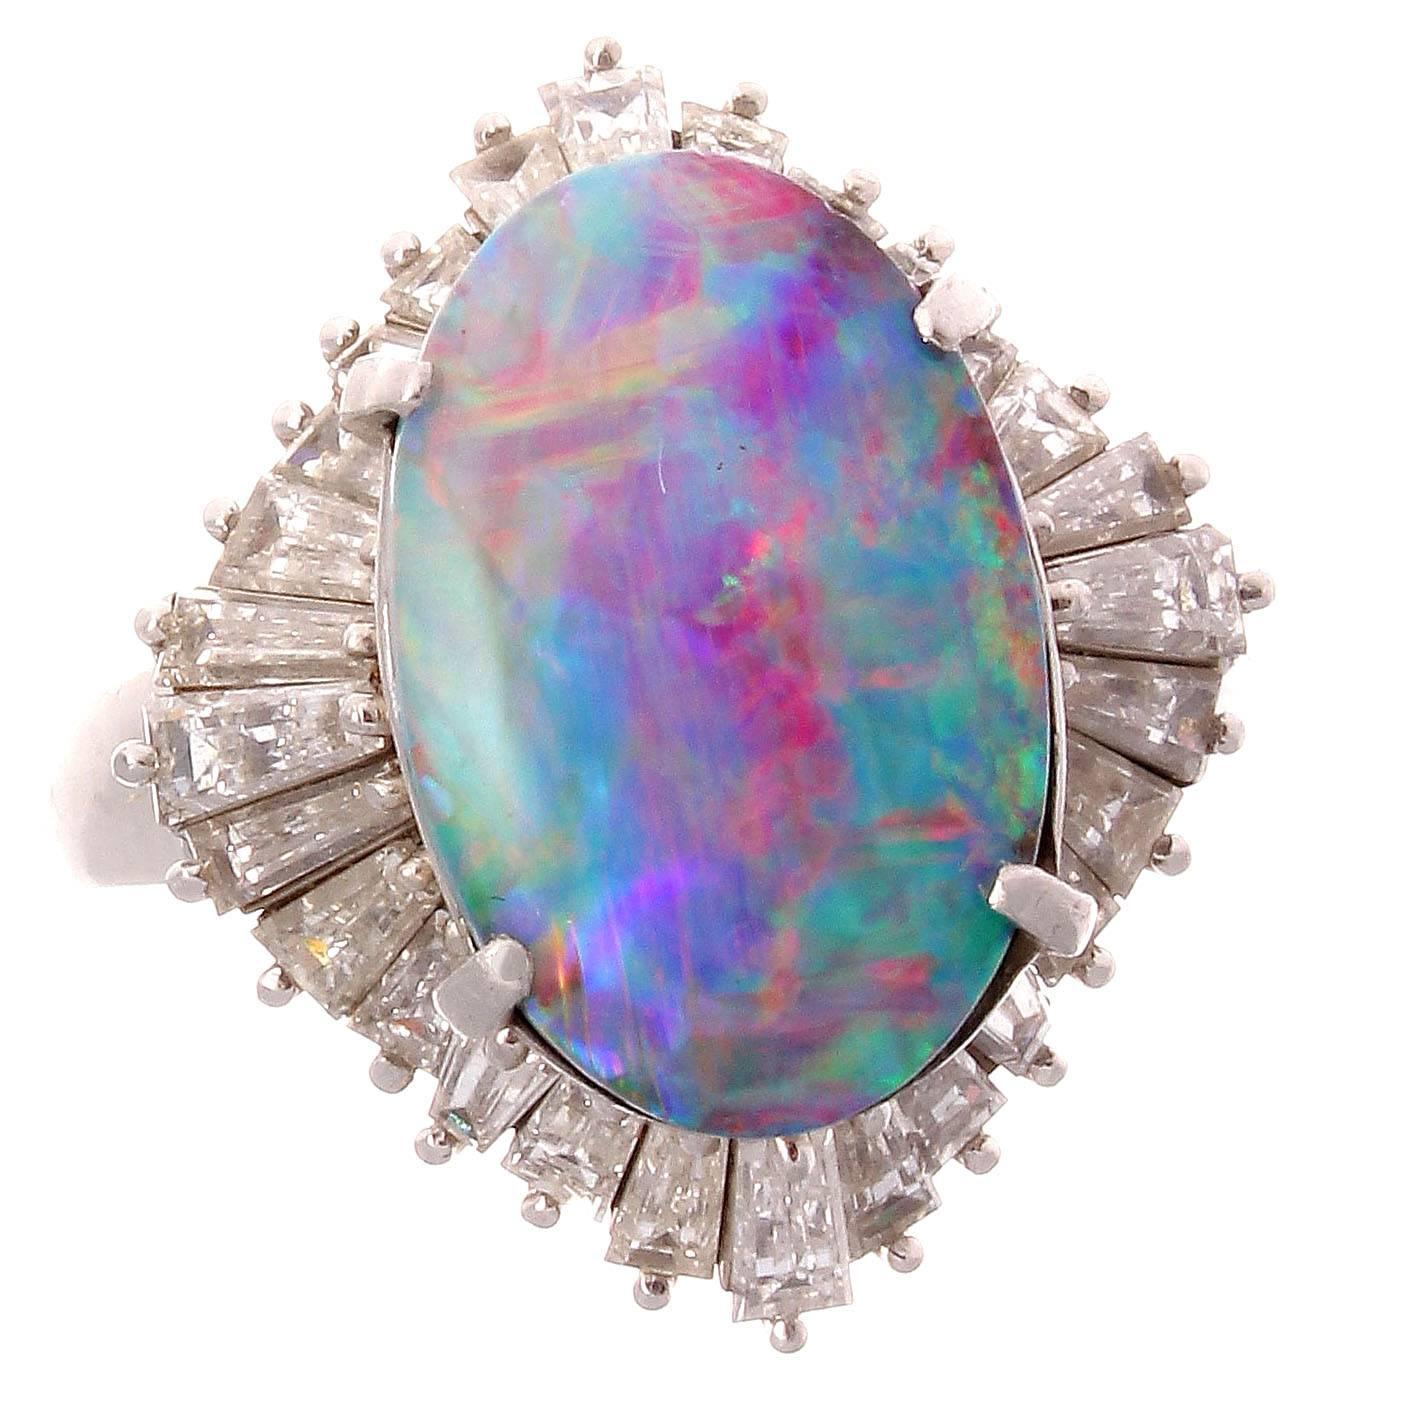 Hypnotic design that features a Crayola box of colors in the 3.45 carat black opal. Surrounded by a ballerina's twirling dress of diamonds. Crafted in platinum.

Ring size 6 and may easily be resized to fit complimentary with your purchase.